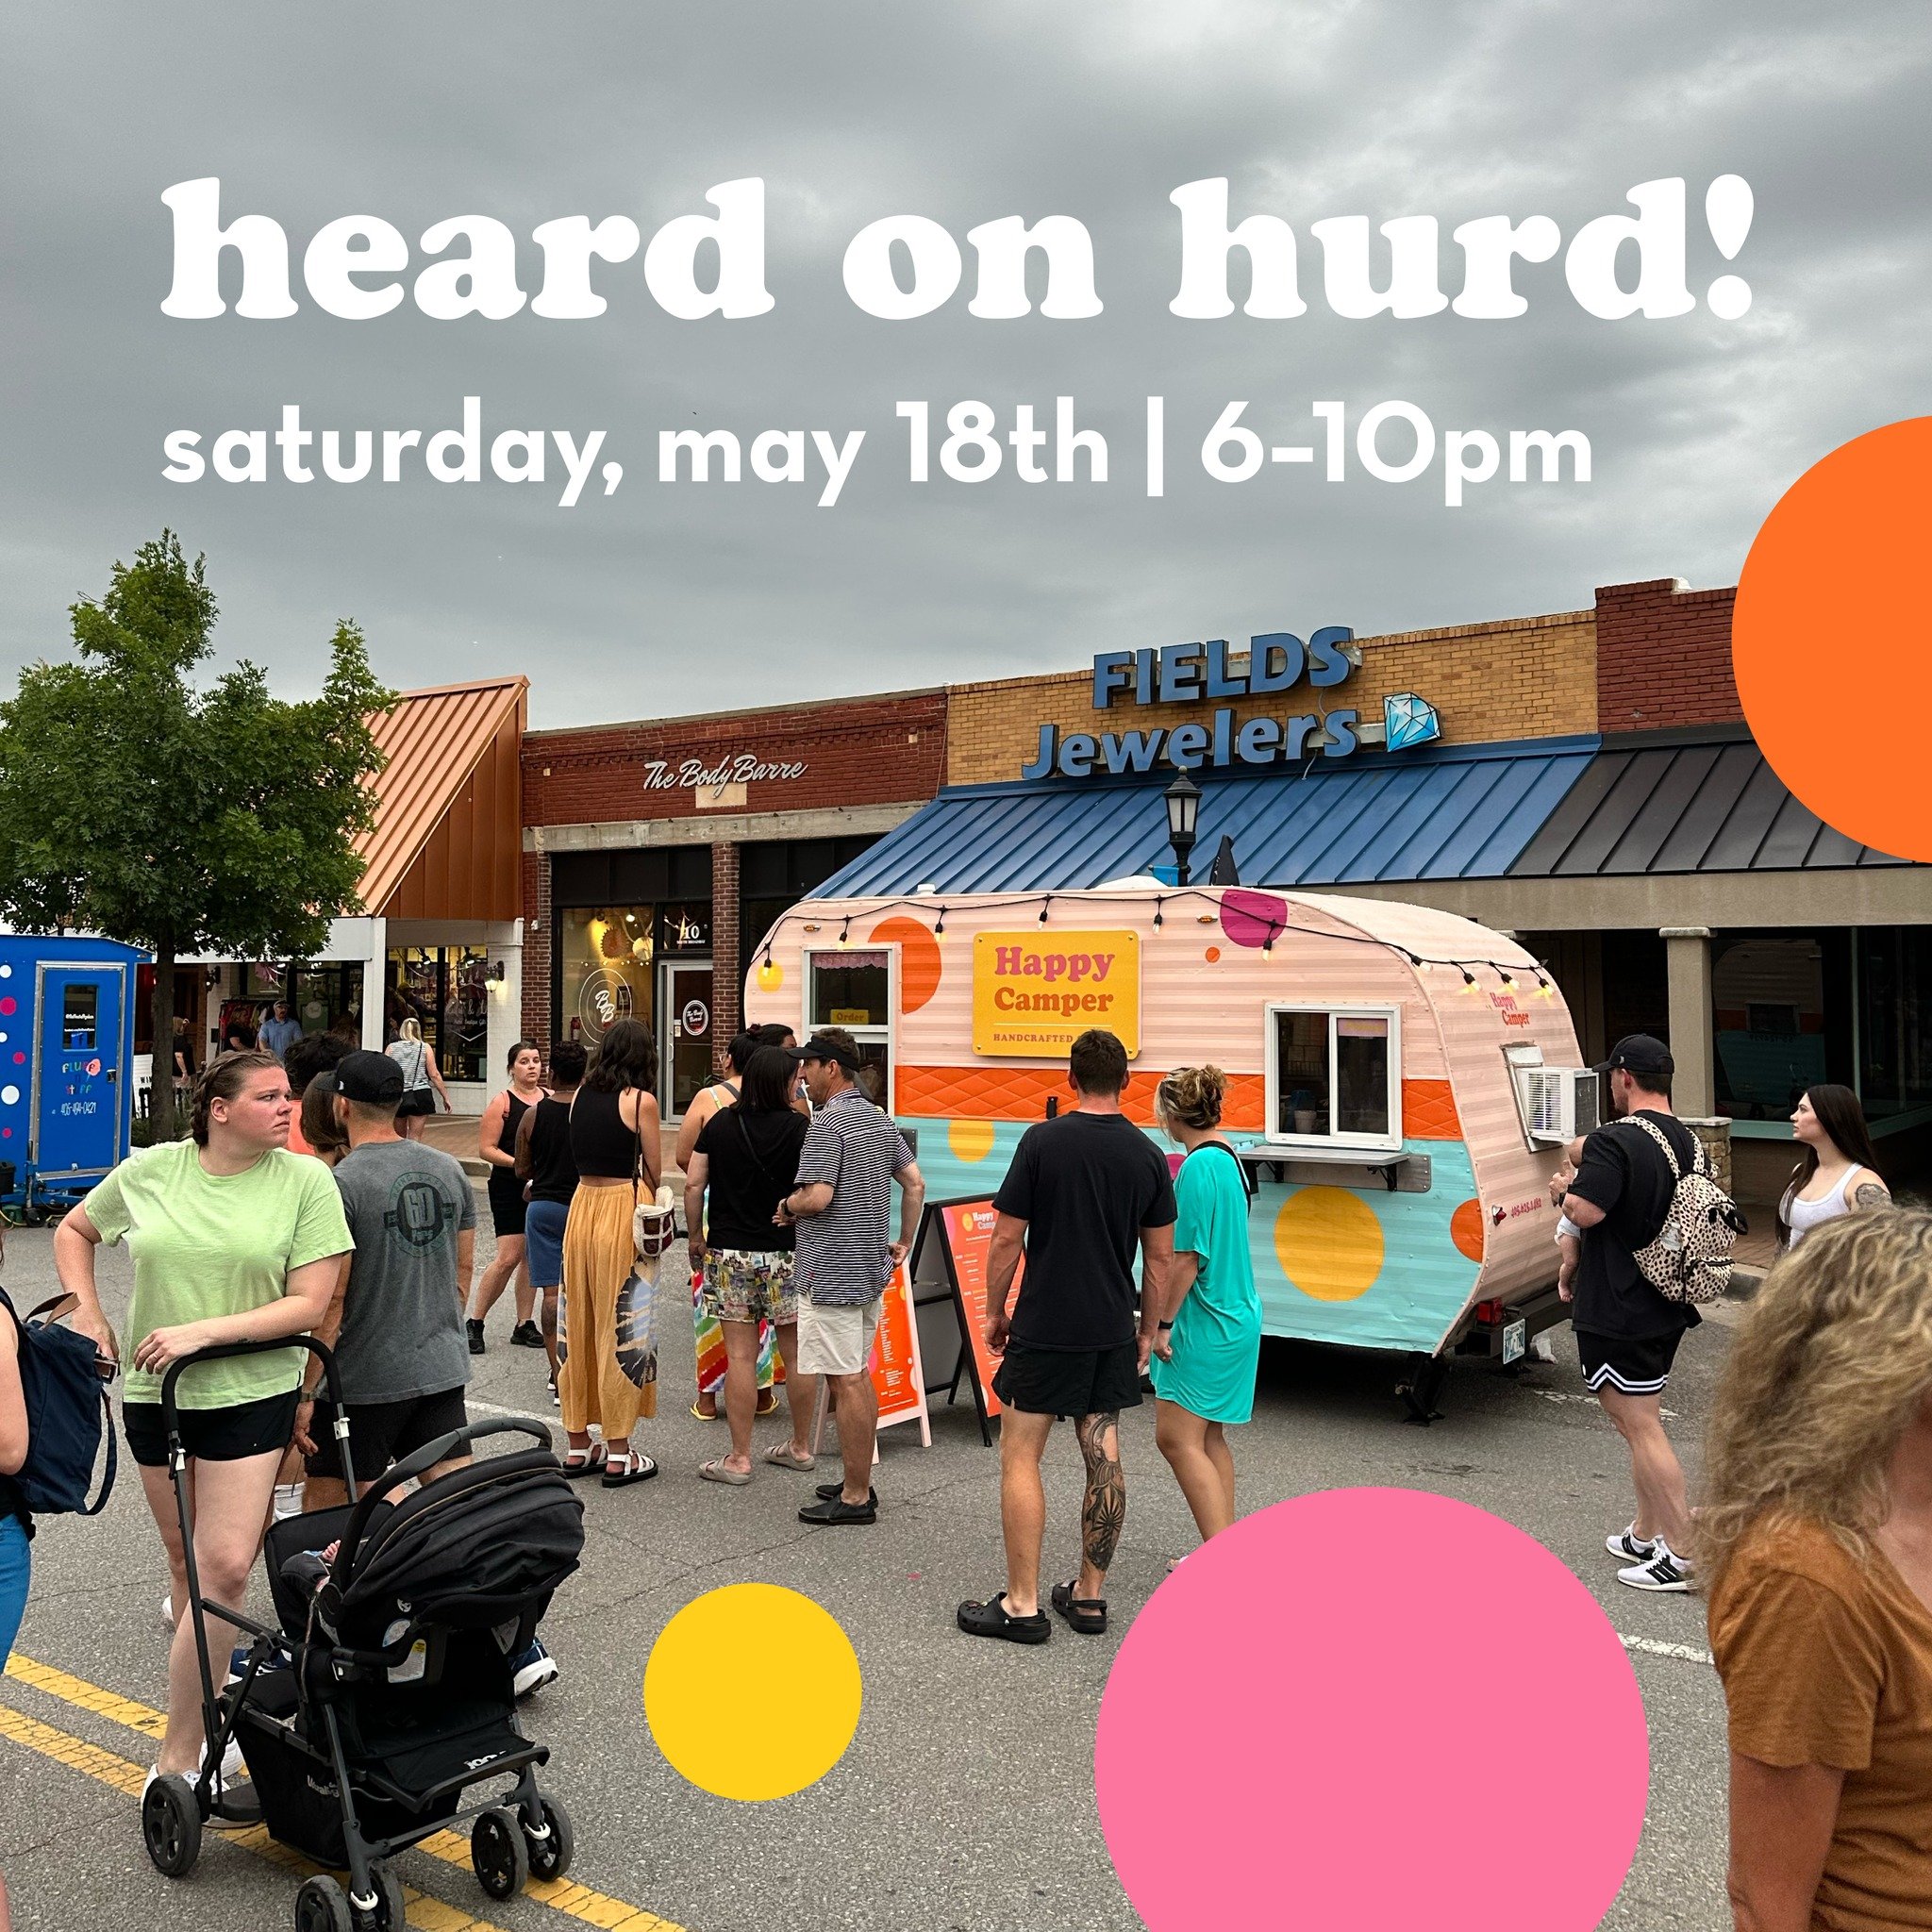 Heard on Hurd is back this Saturday night from 6-10pm in downtown Edmond, and so are we! See you there, happy campers! @heardonhurd 
-
#edmondevents #edmondfoodies #okcfoodies #heardonhurd